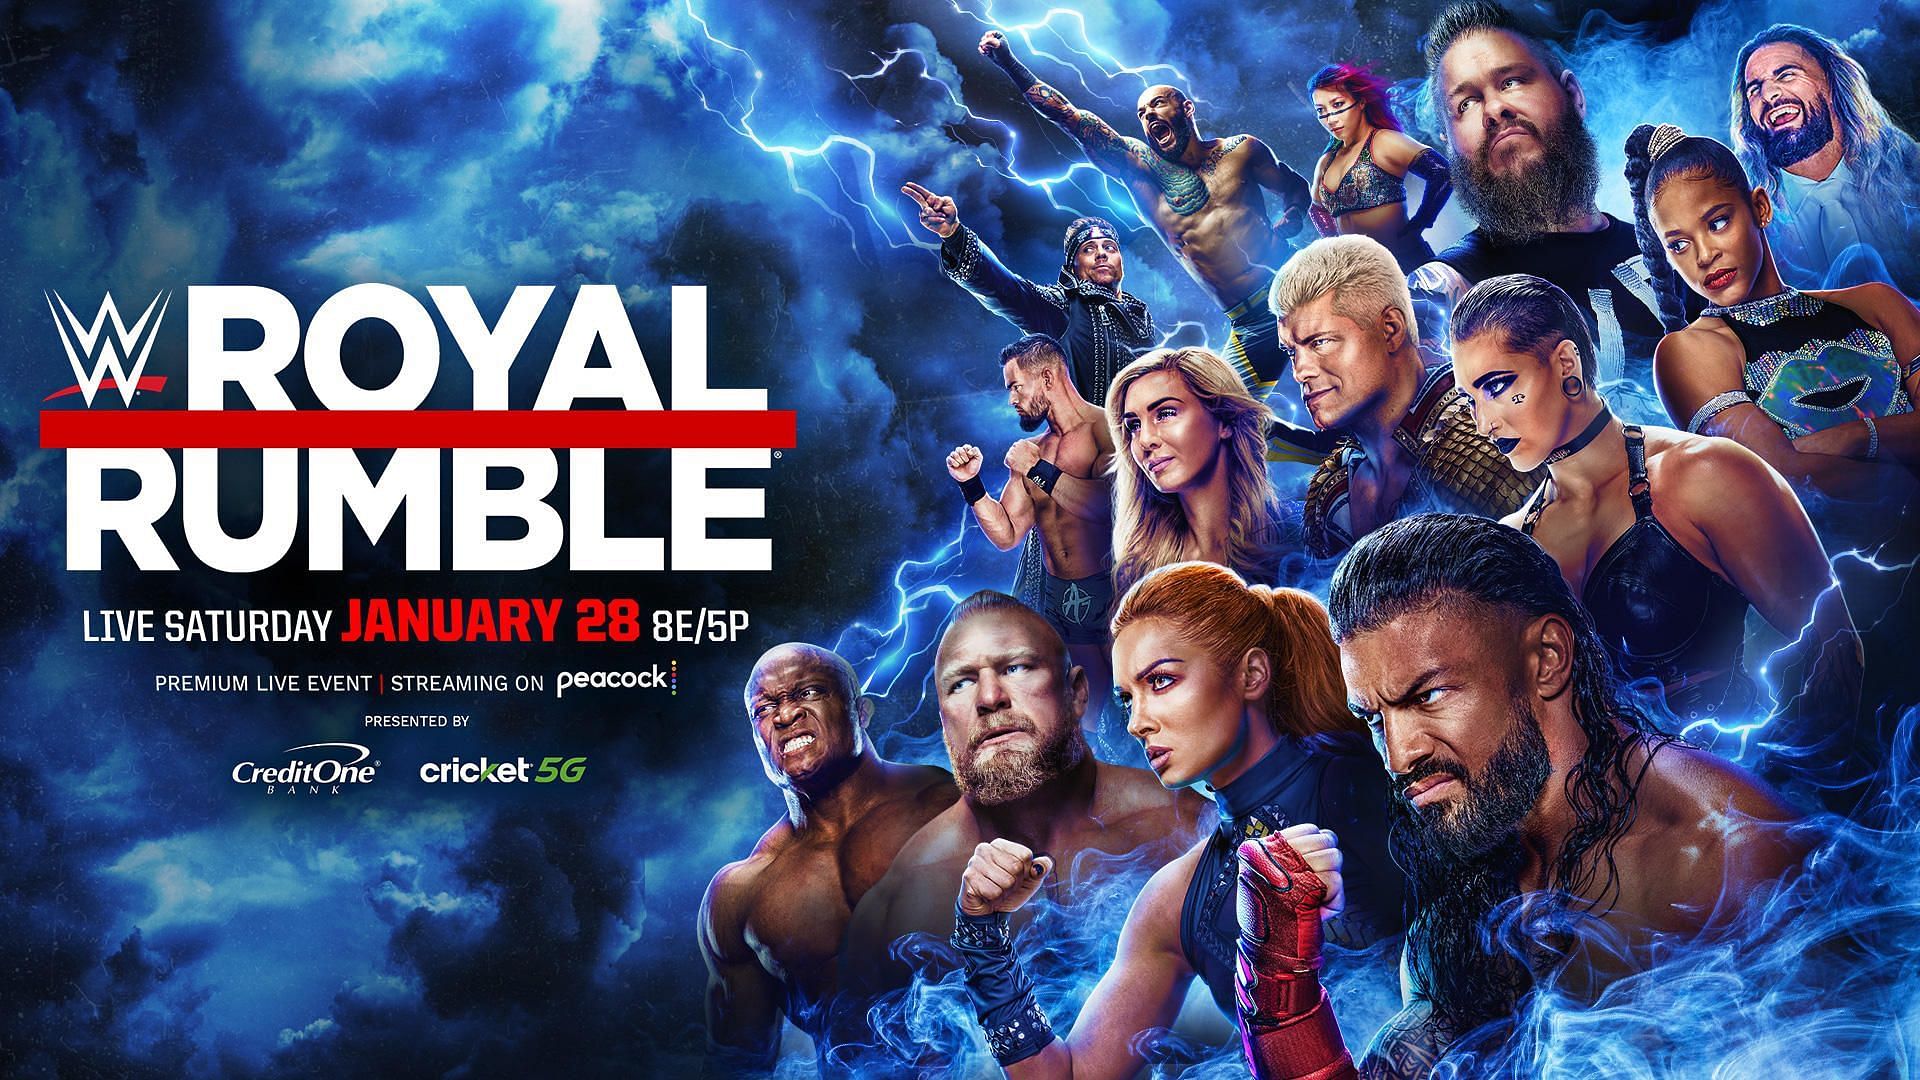 The Royal Rumble will take place on Saturday, January 28, 2023